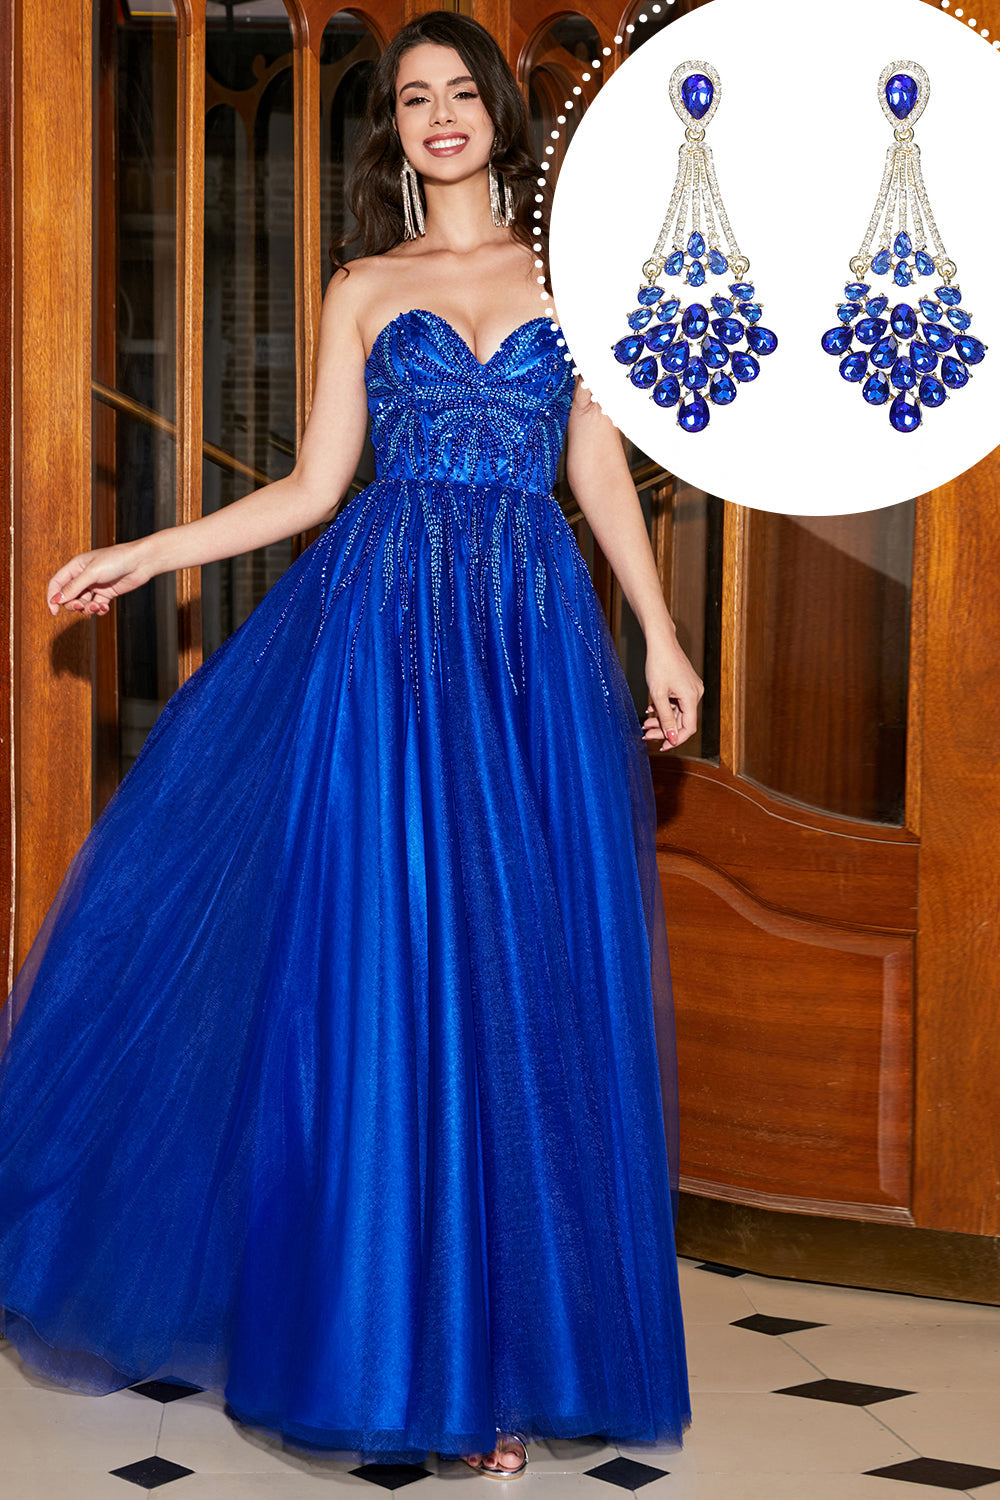 Royal Blue A-Line Sweetheart Long Beaded Formal Dress with Accessory